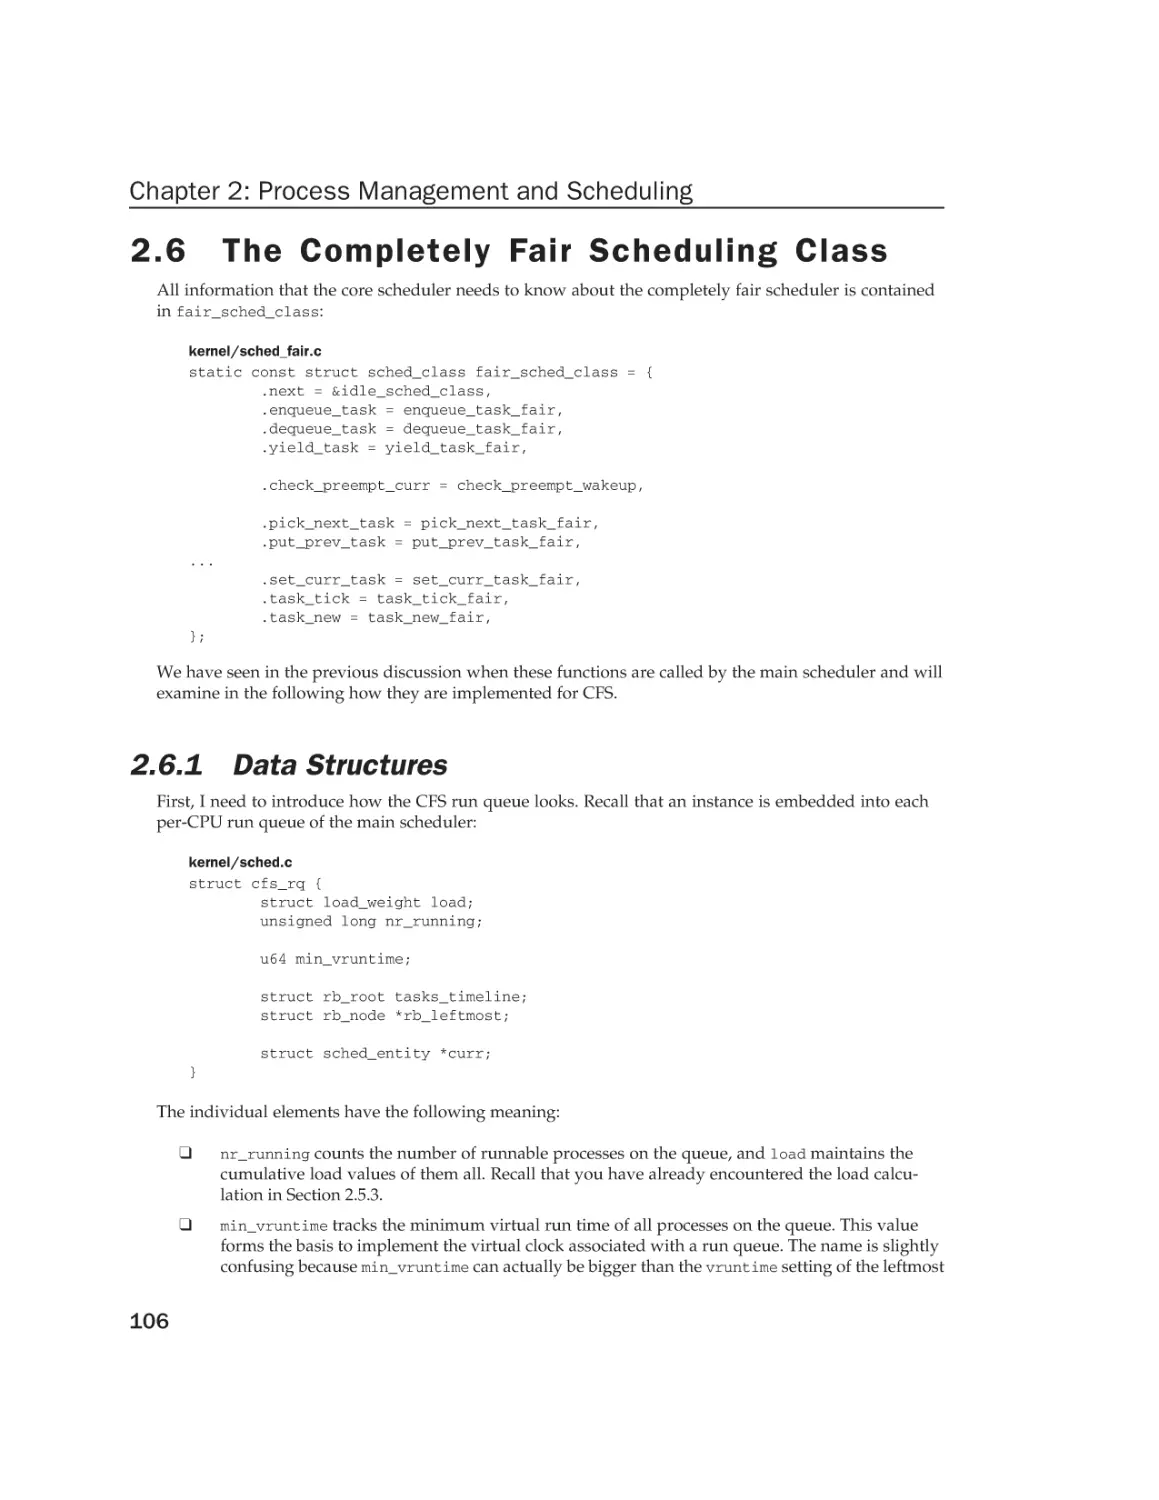 2.6 The Completely Fair Scheduling Class